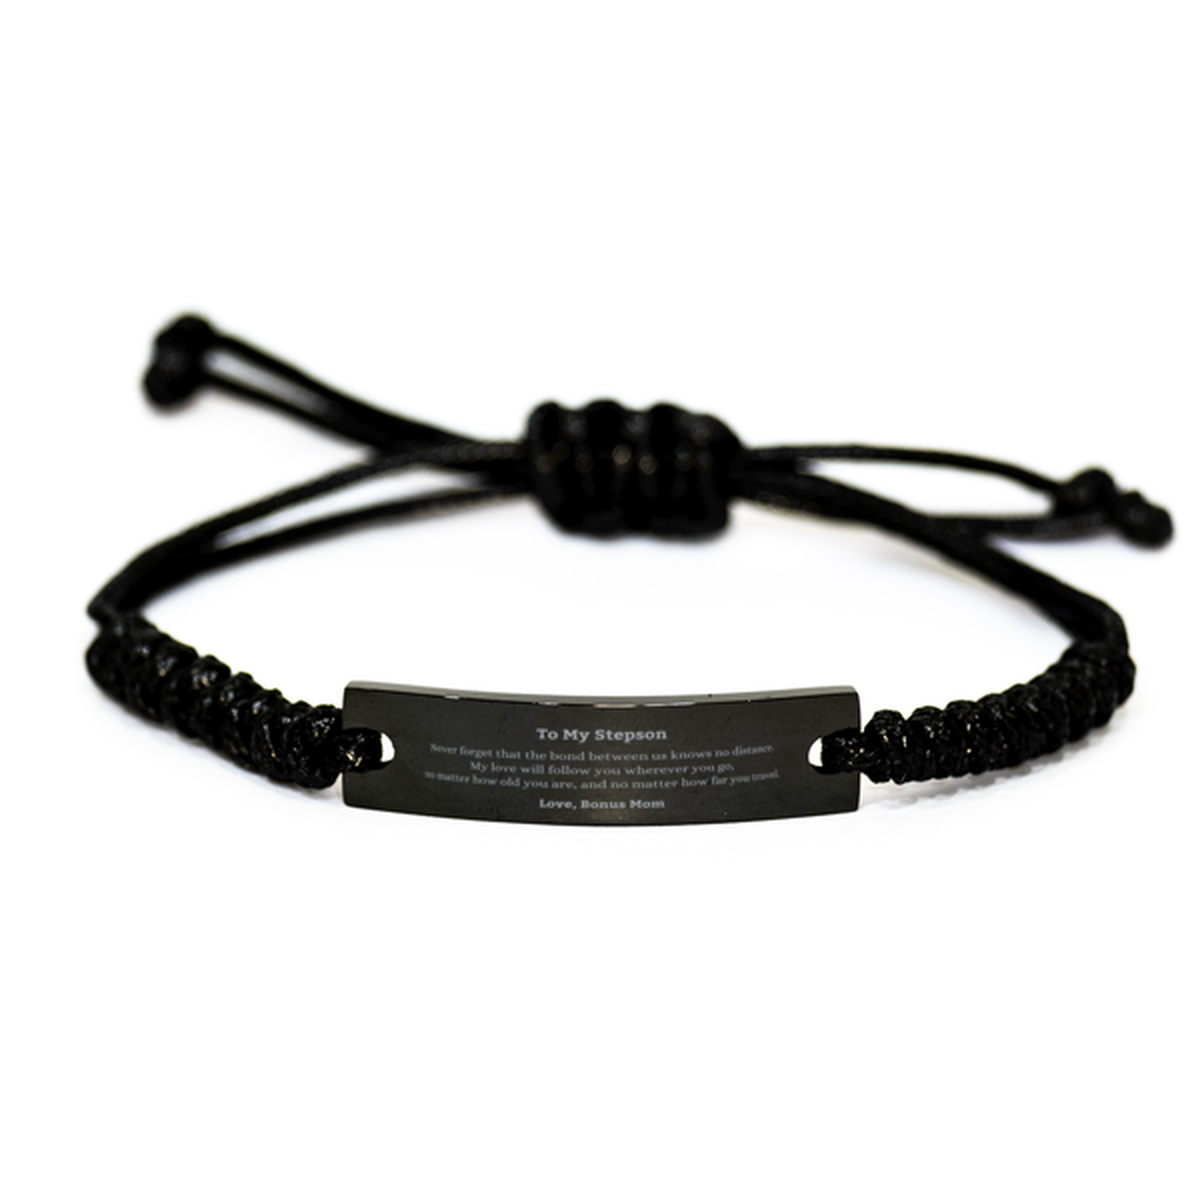 Stepson Birthday Gifts from Bonus Mom, Adjustable Black Rope Bracelet for Stepson Christmas Graduation Unique Gifts Stepson Never forget that the bond between us knows no distance. Love, Bonus Mom